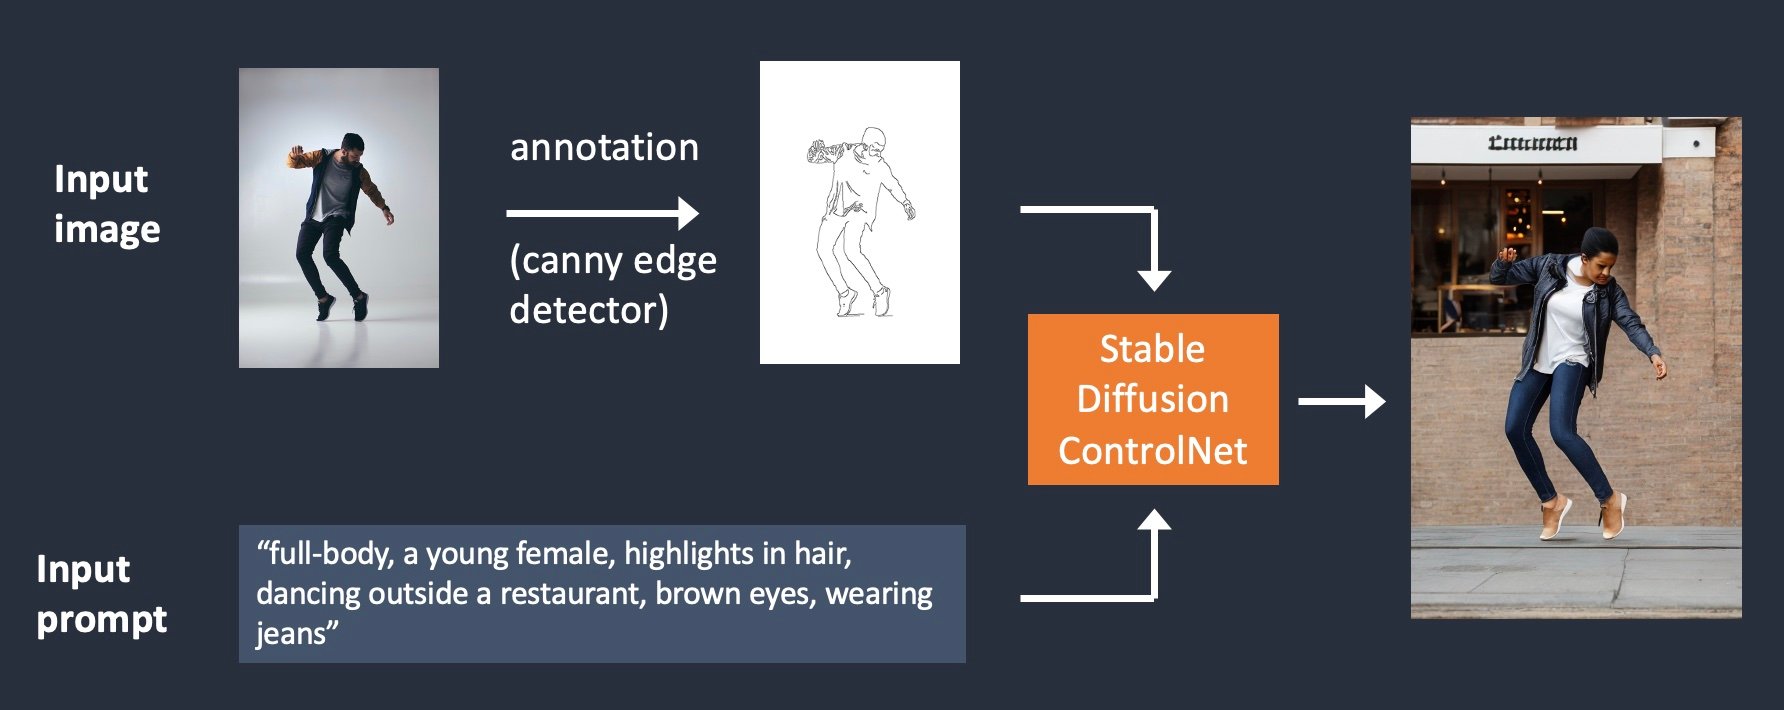 Stable Diffusion ControlNet model workflow.